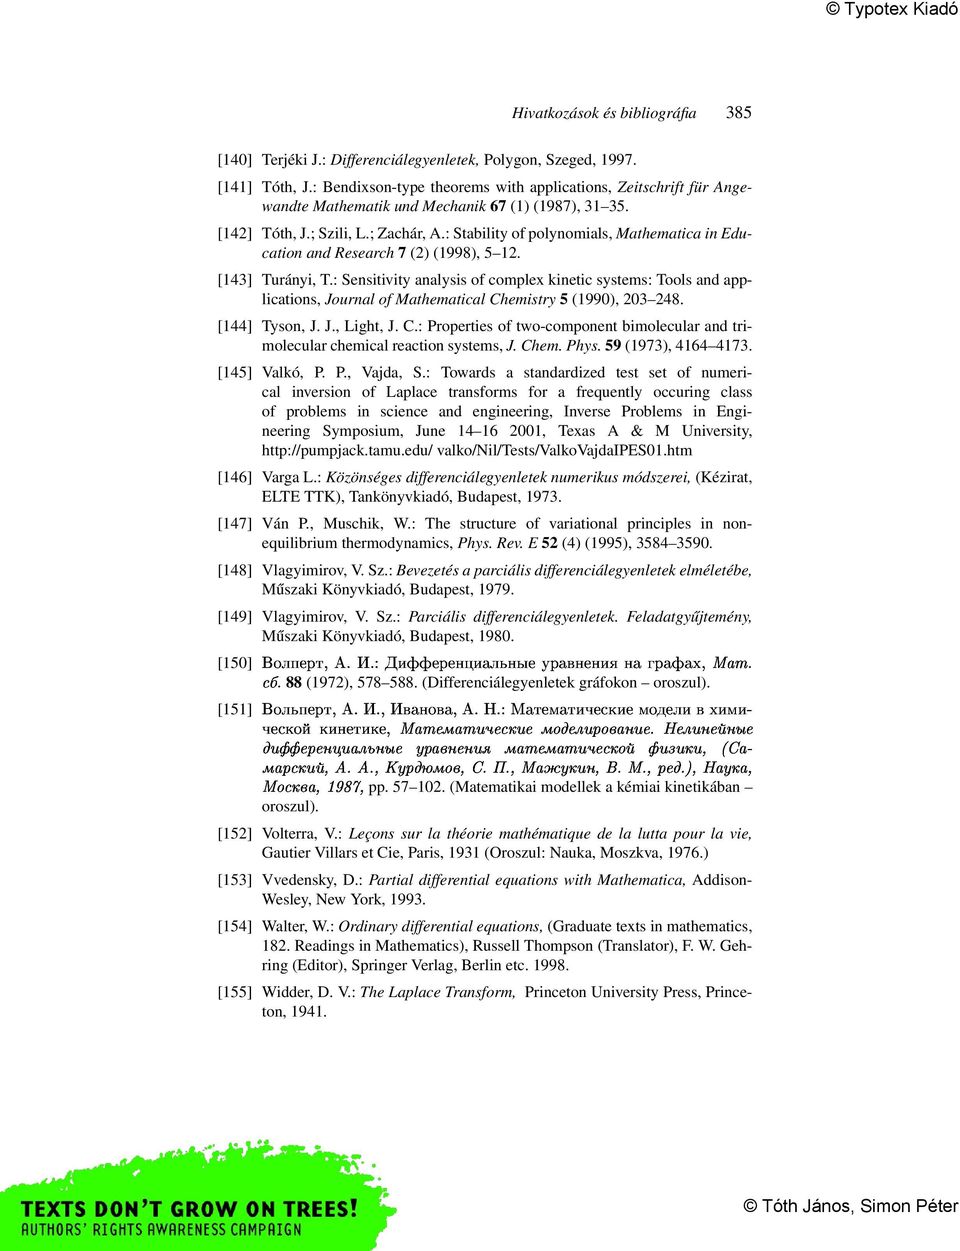 : Stability of polynomials, Mathematica in Education and Research 7 (2) (1998), 5 12. [143] Turányi, T.